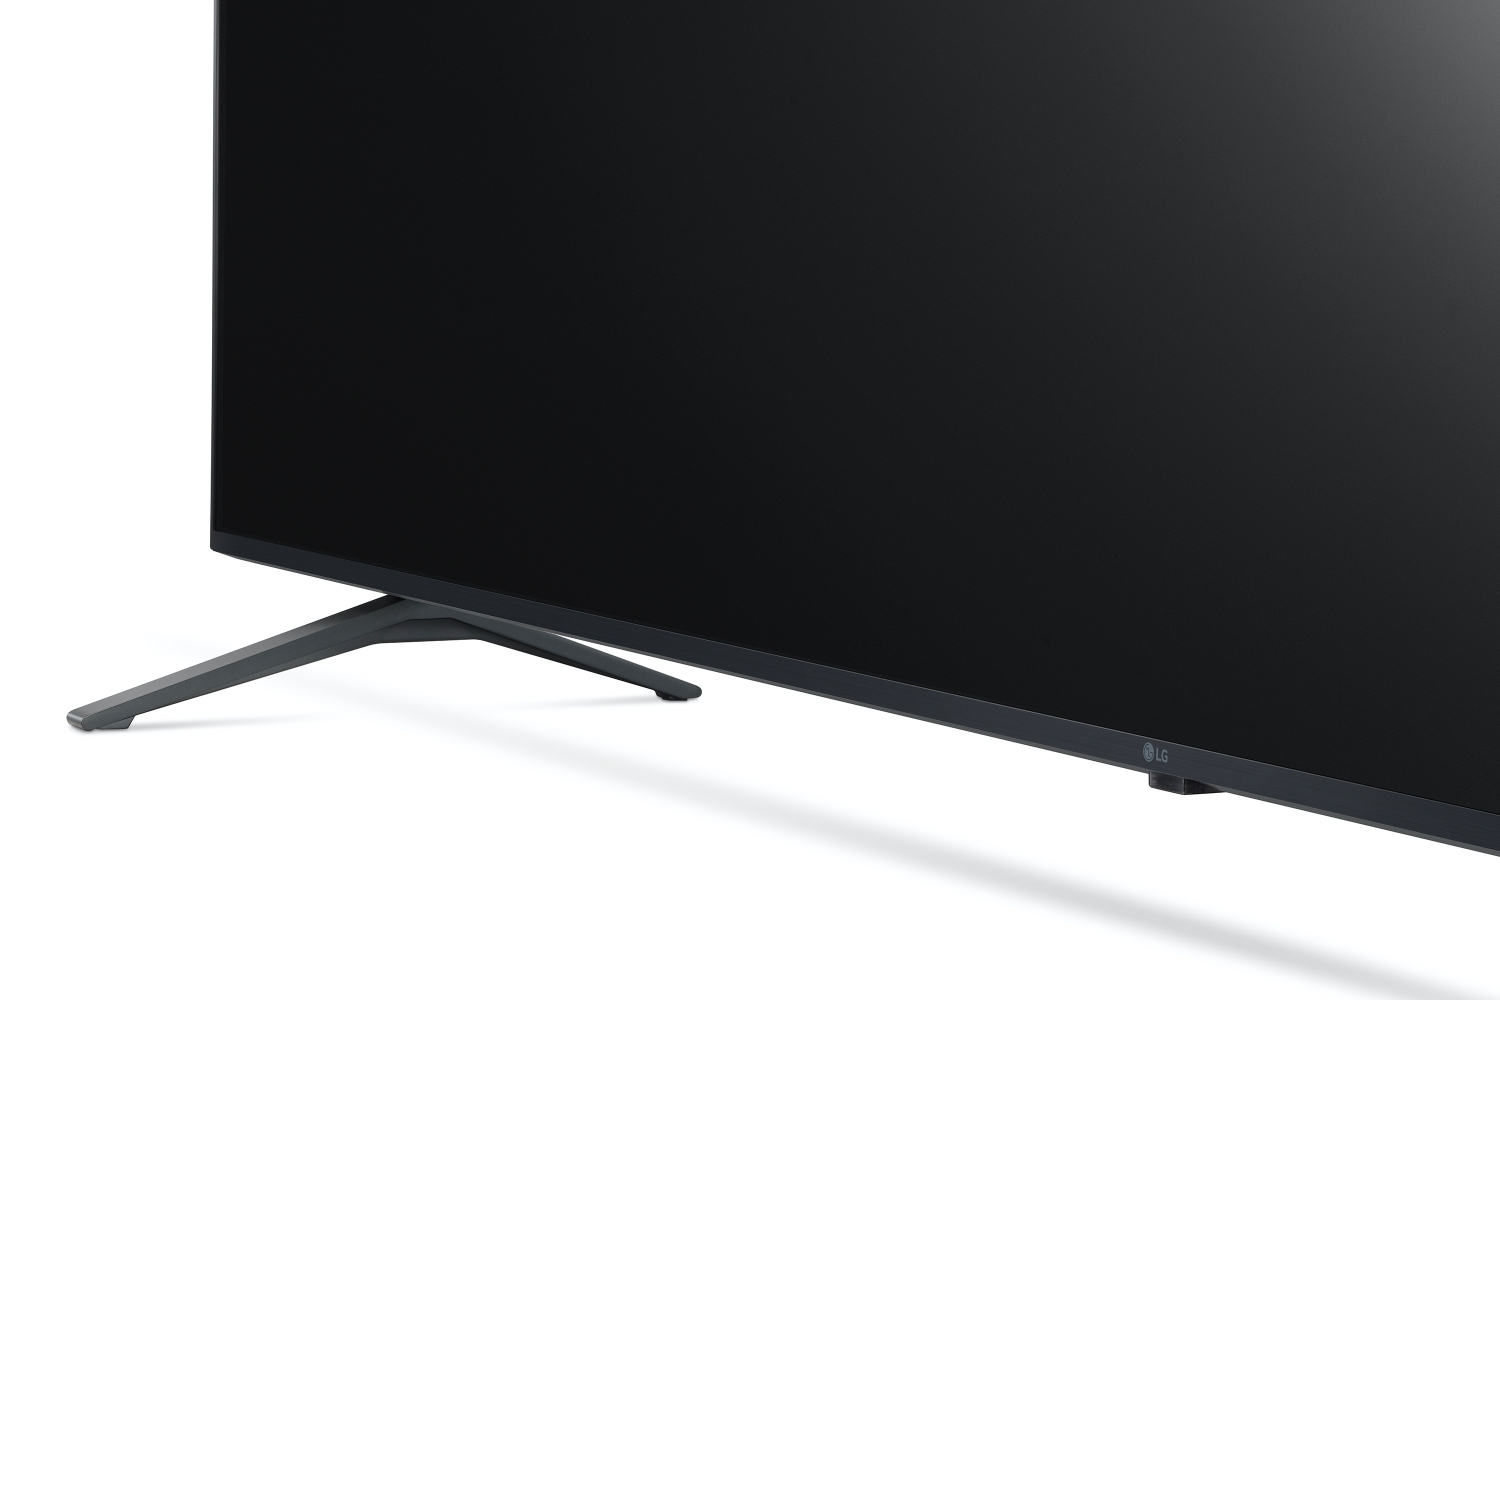 LG 82UP80006LA 82" 4K UHD LED Smart TV with Freeview Play - 5